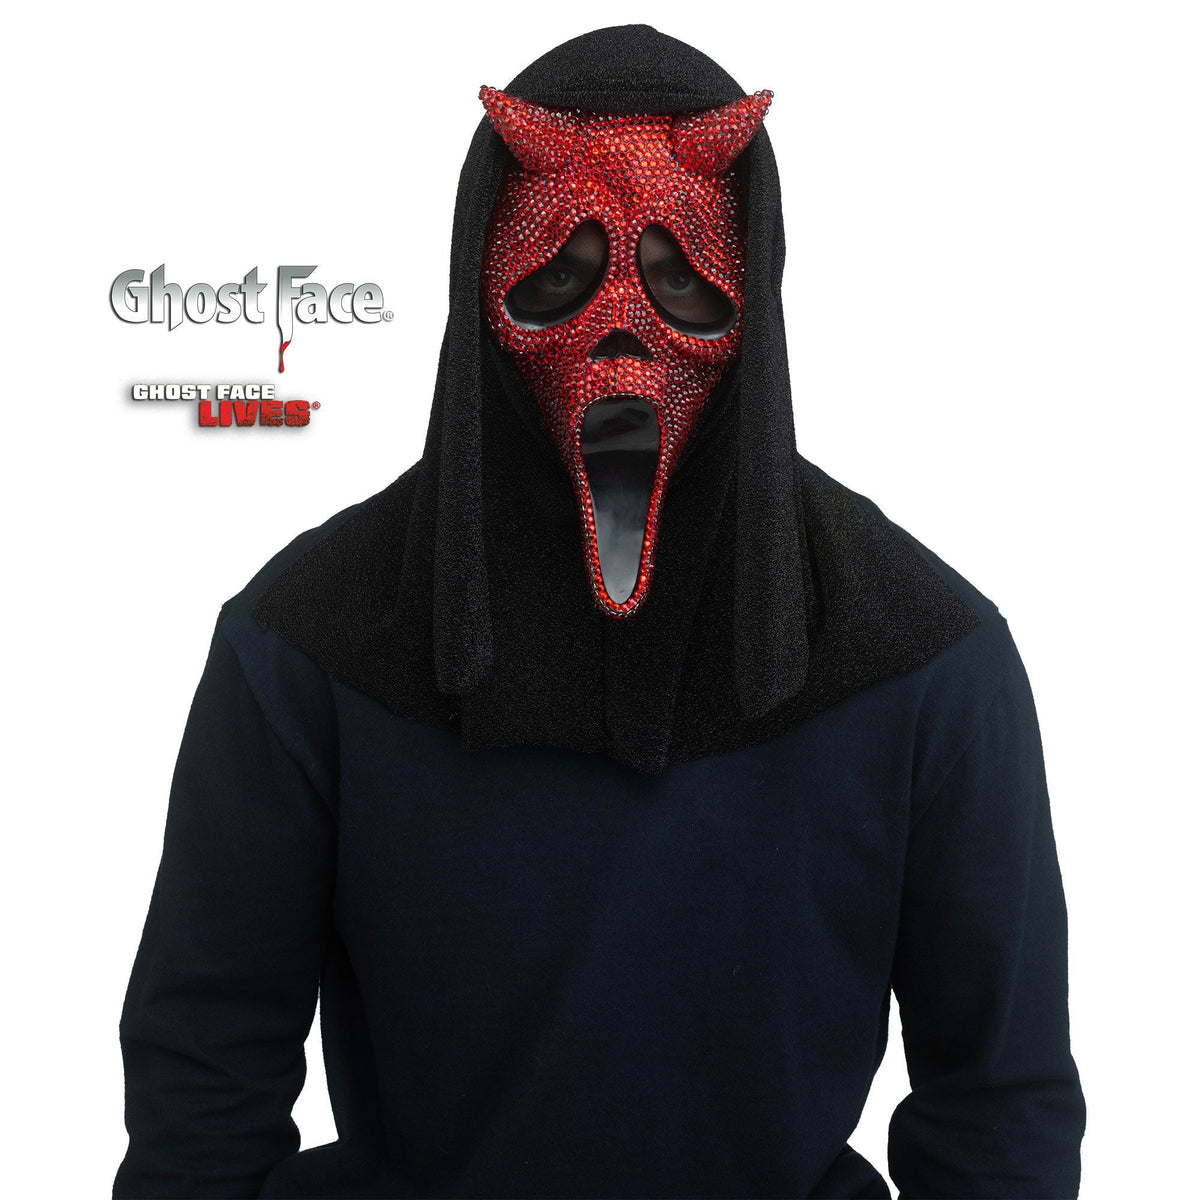 FUN WORLD Costume Accessories Ghost Face Devil Face Bling Mask for Adults